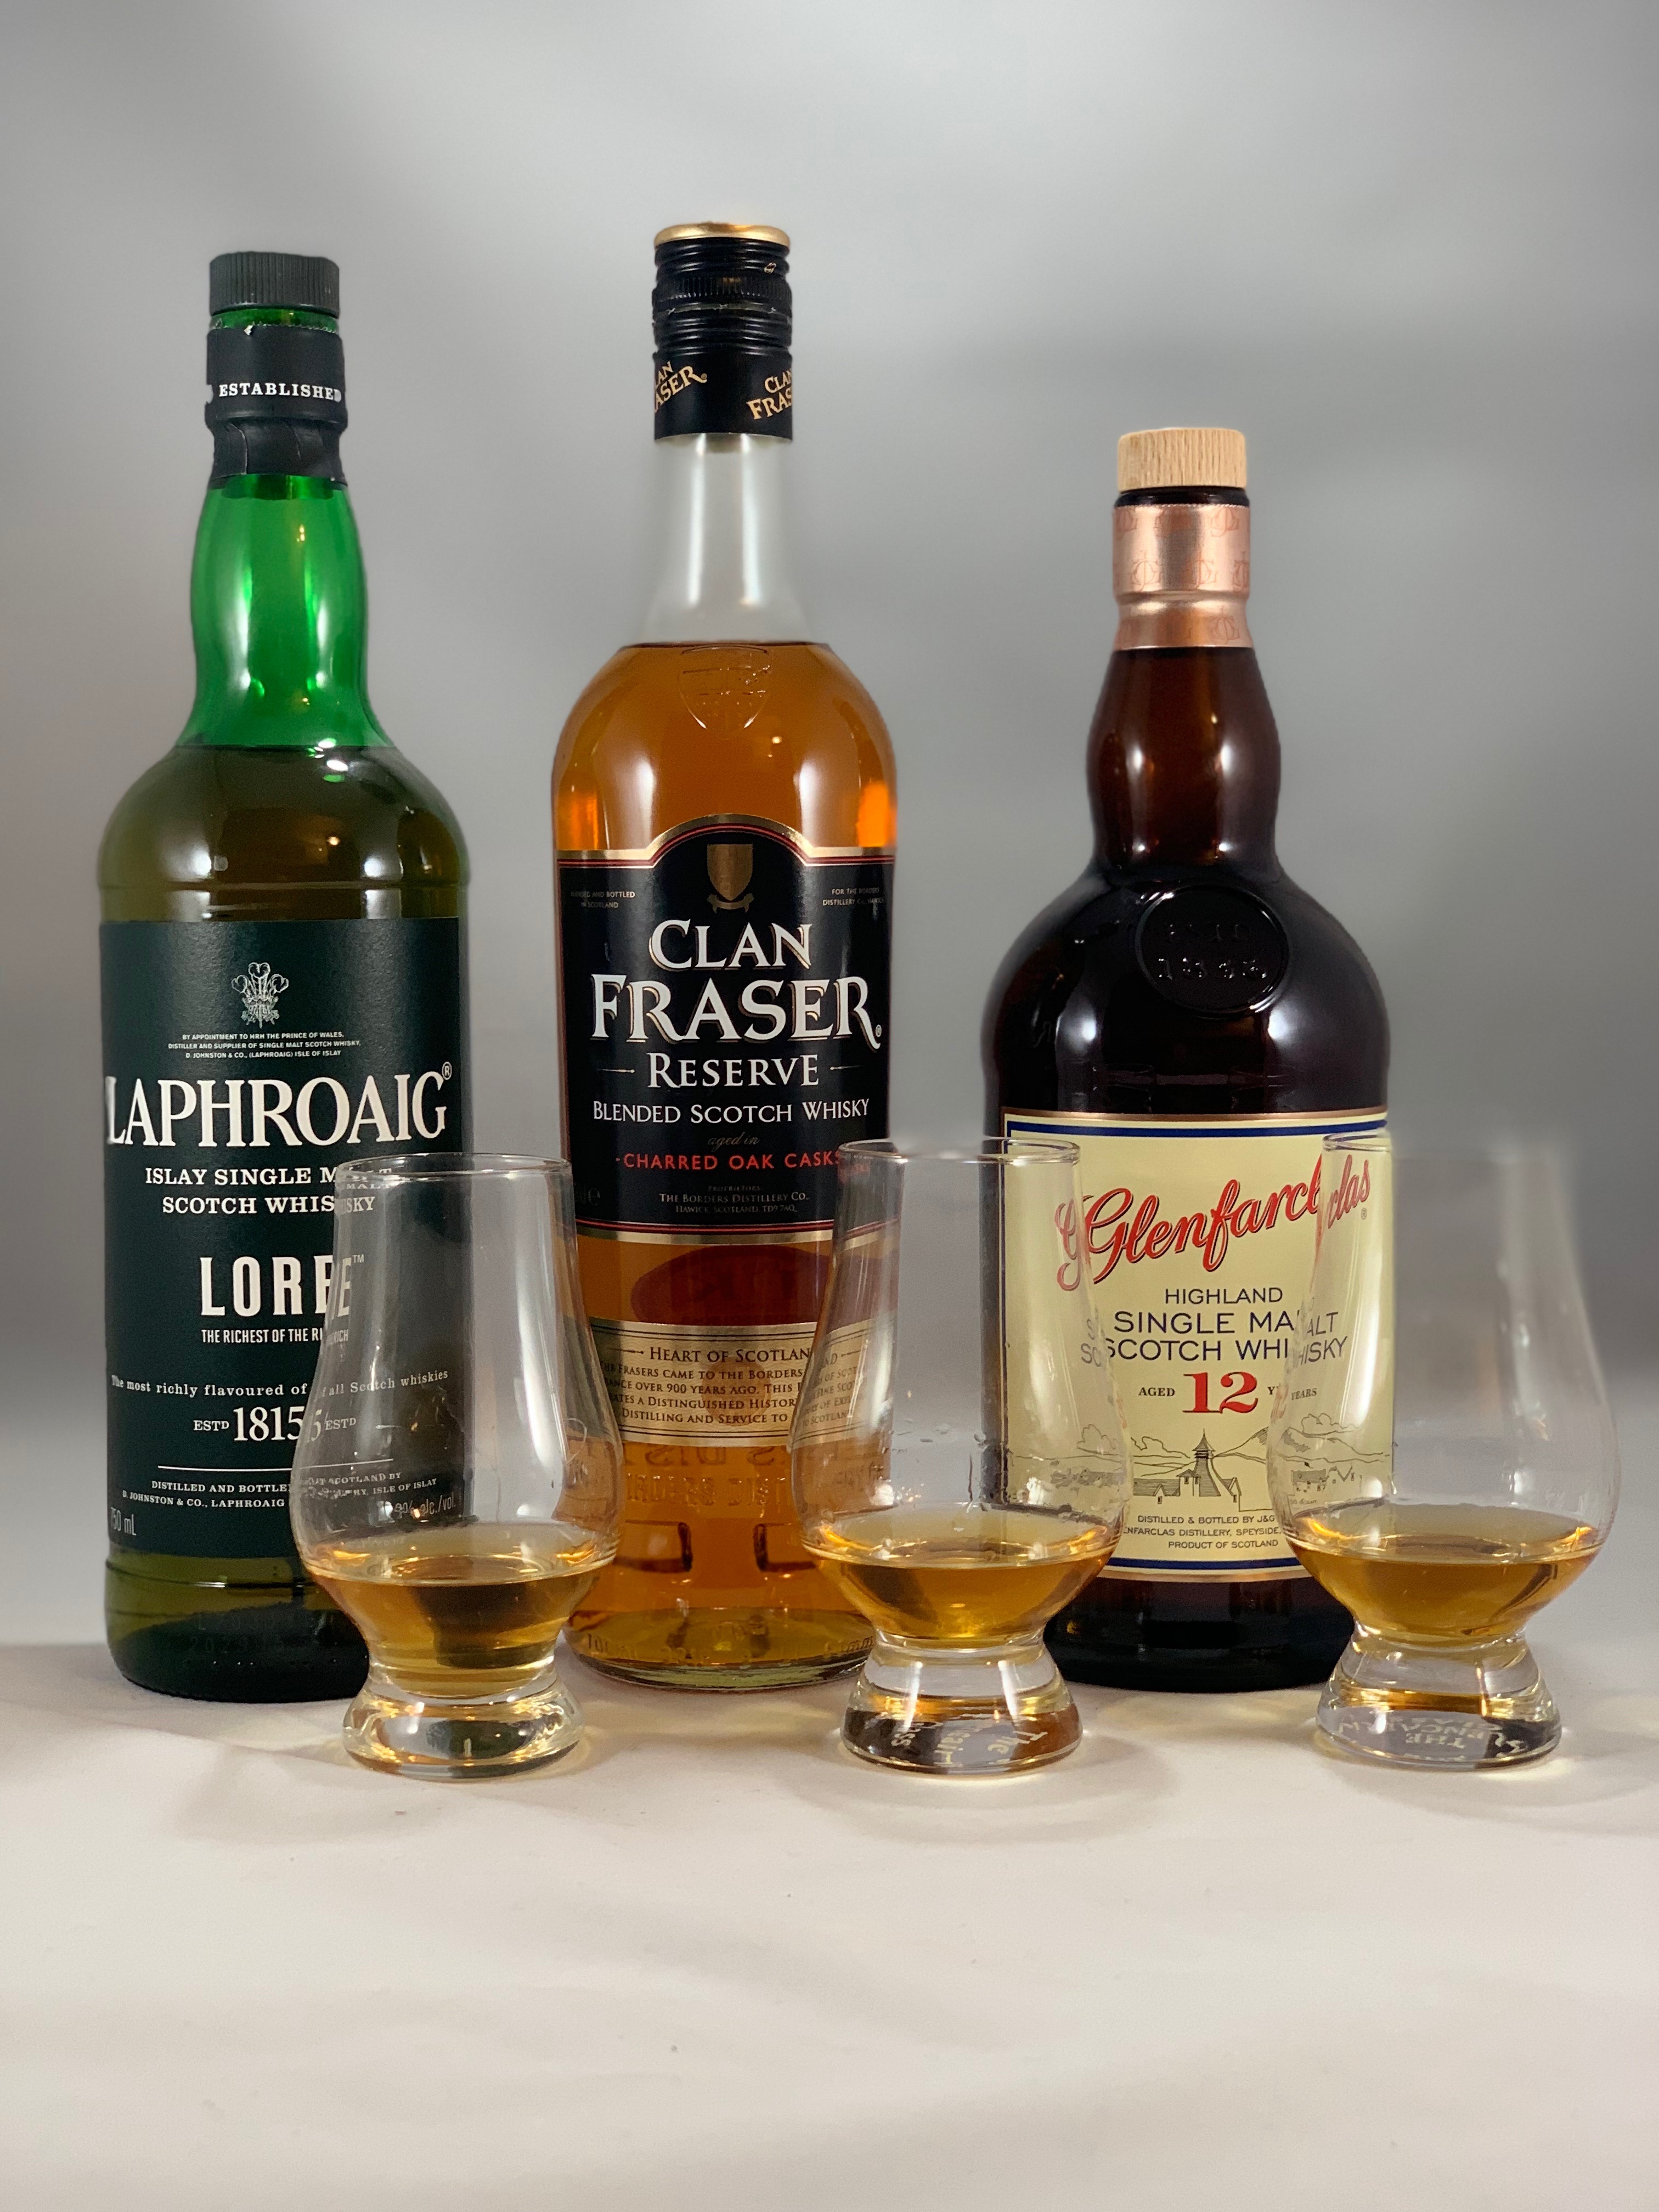 scotch whisky lineup in bottles with pours in glasses